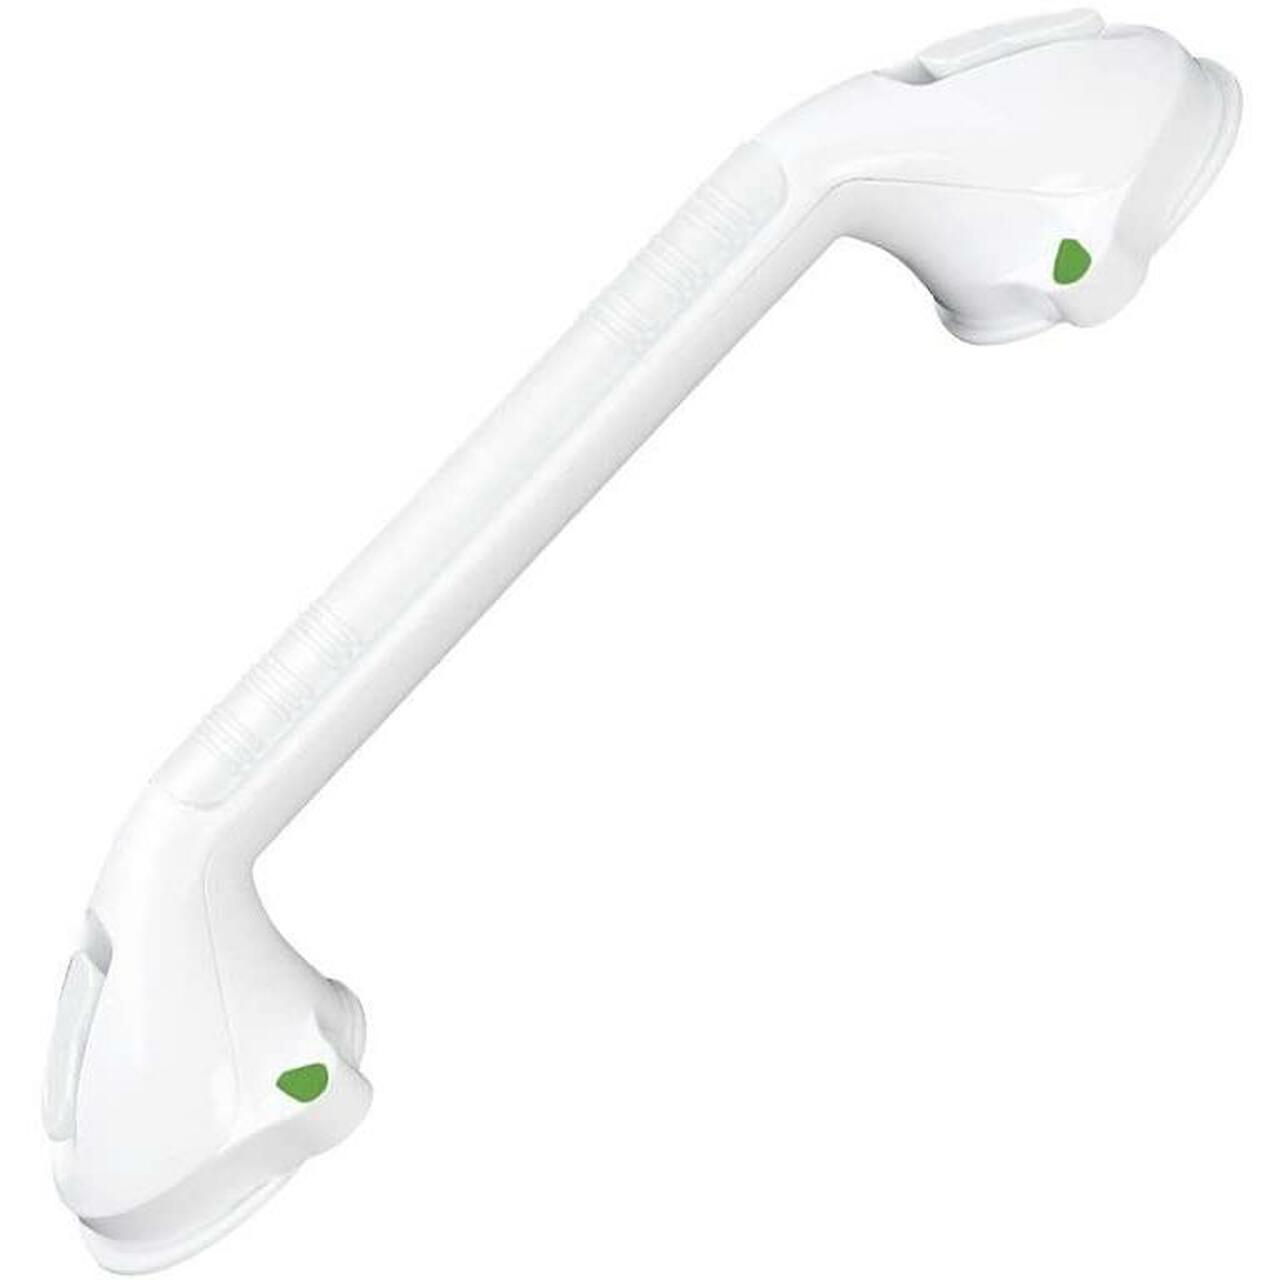 Wenko Secura Wall Grip with Indicator - Bath/Shower Support Handrail Bar, 59 cm 5696